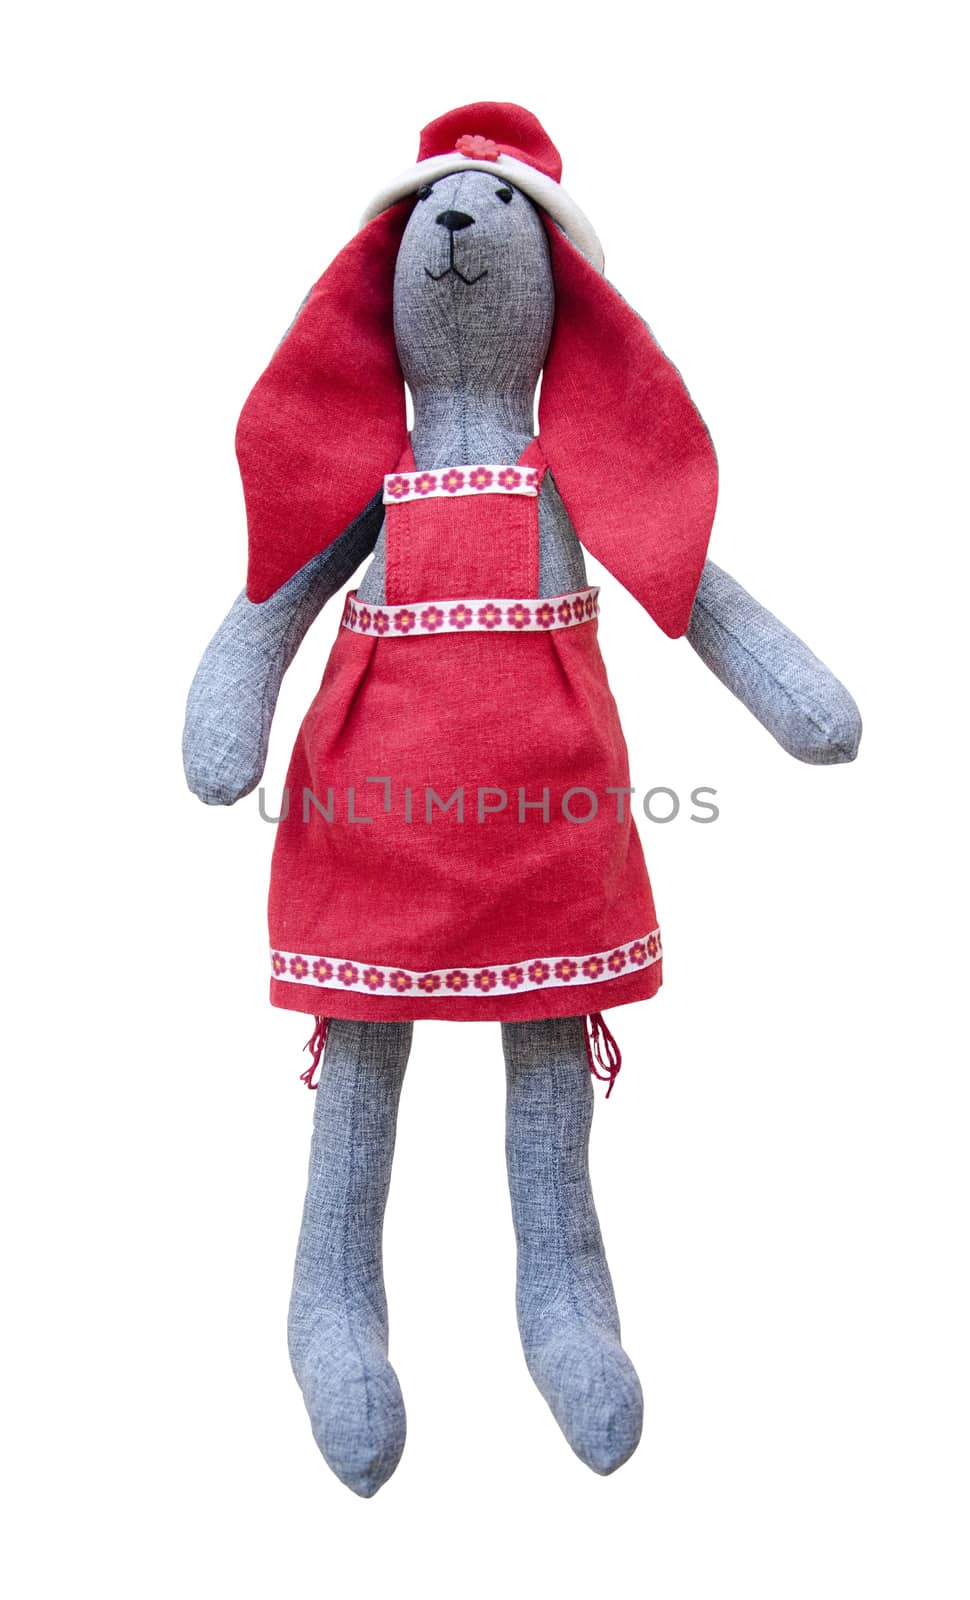 The Isolated handmade doll hare with red ears in red apron